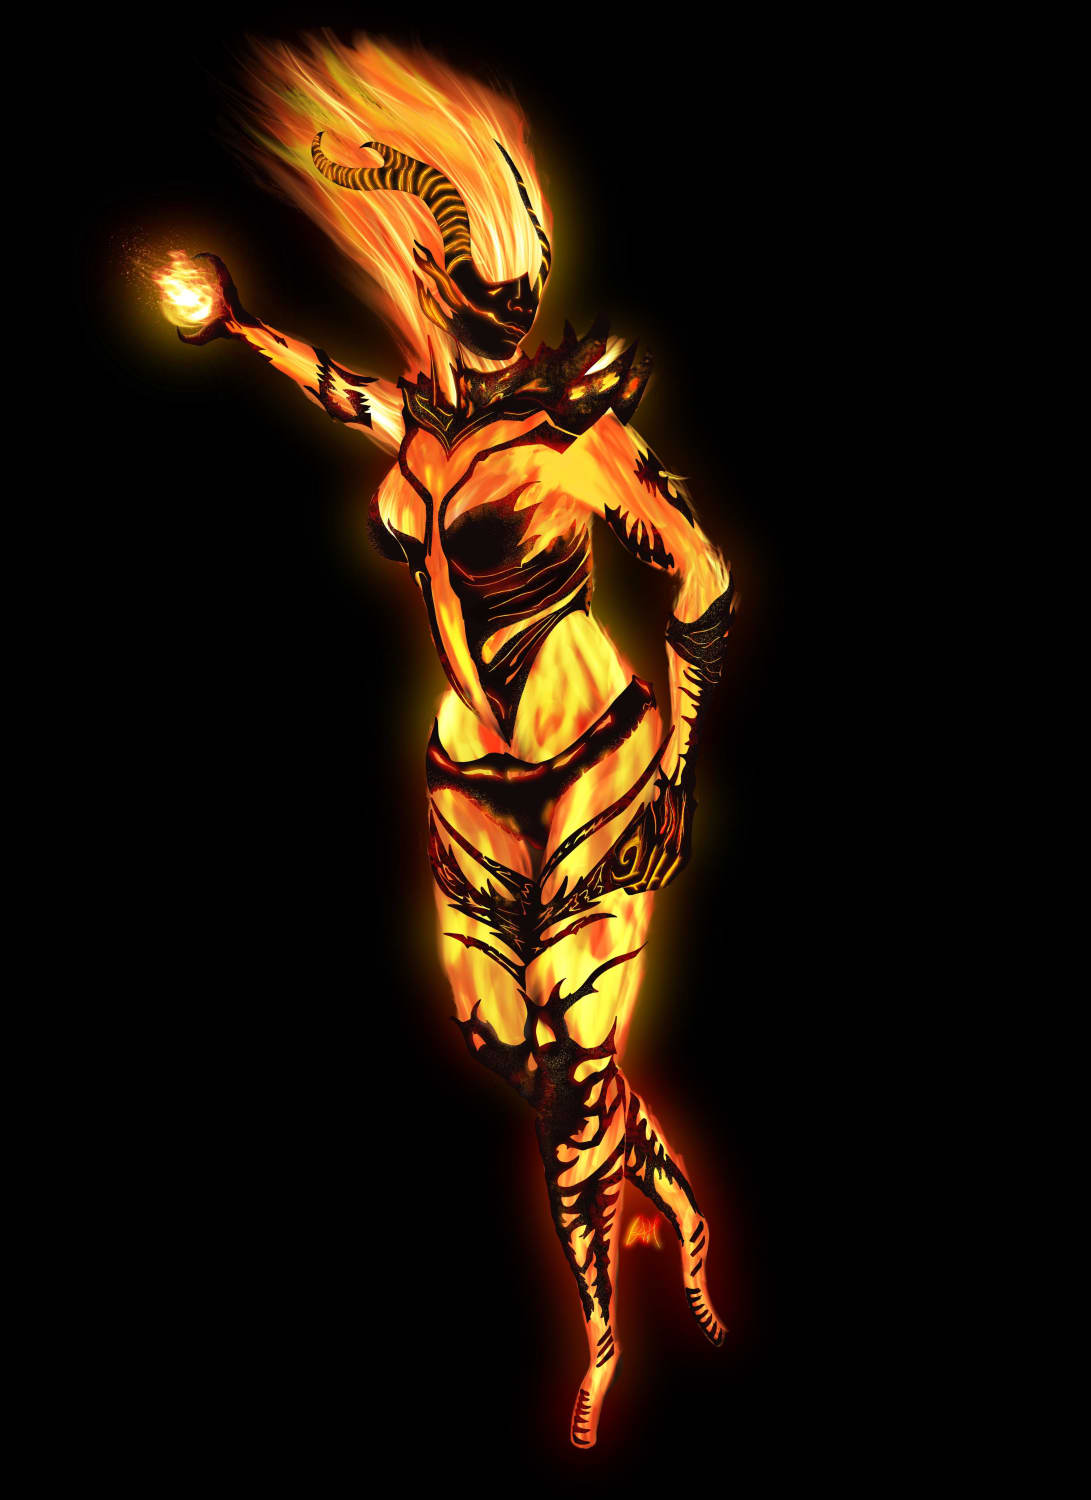 Decided to draw a Flame Atronach- I couldn’t stop tweaking things but I needed to shelve it for now. I wonder what the Atronachs will look like in ES6 🤔